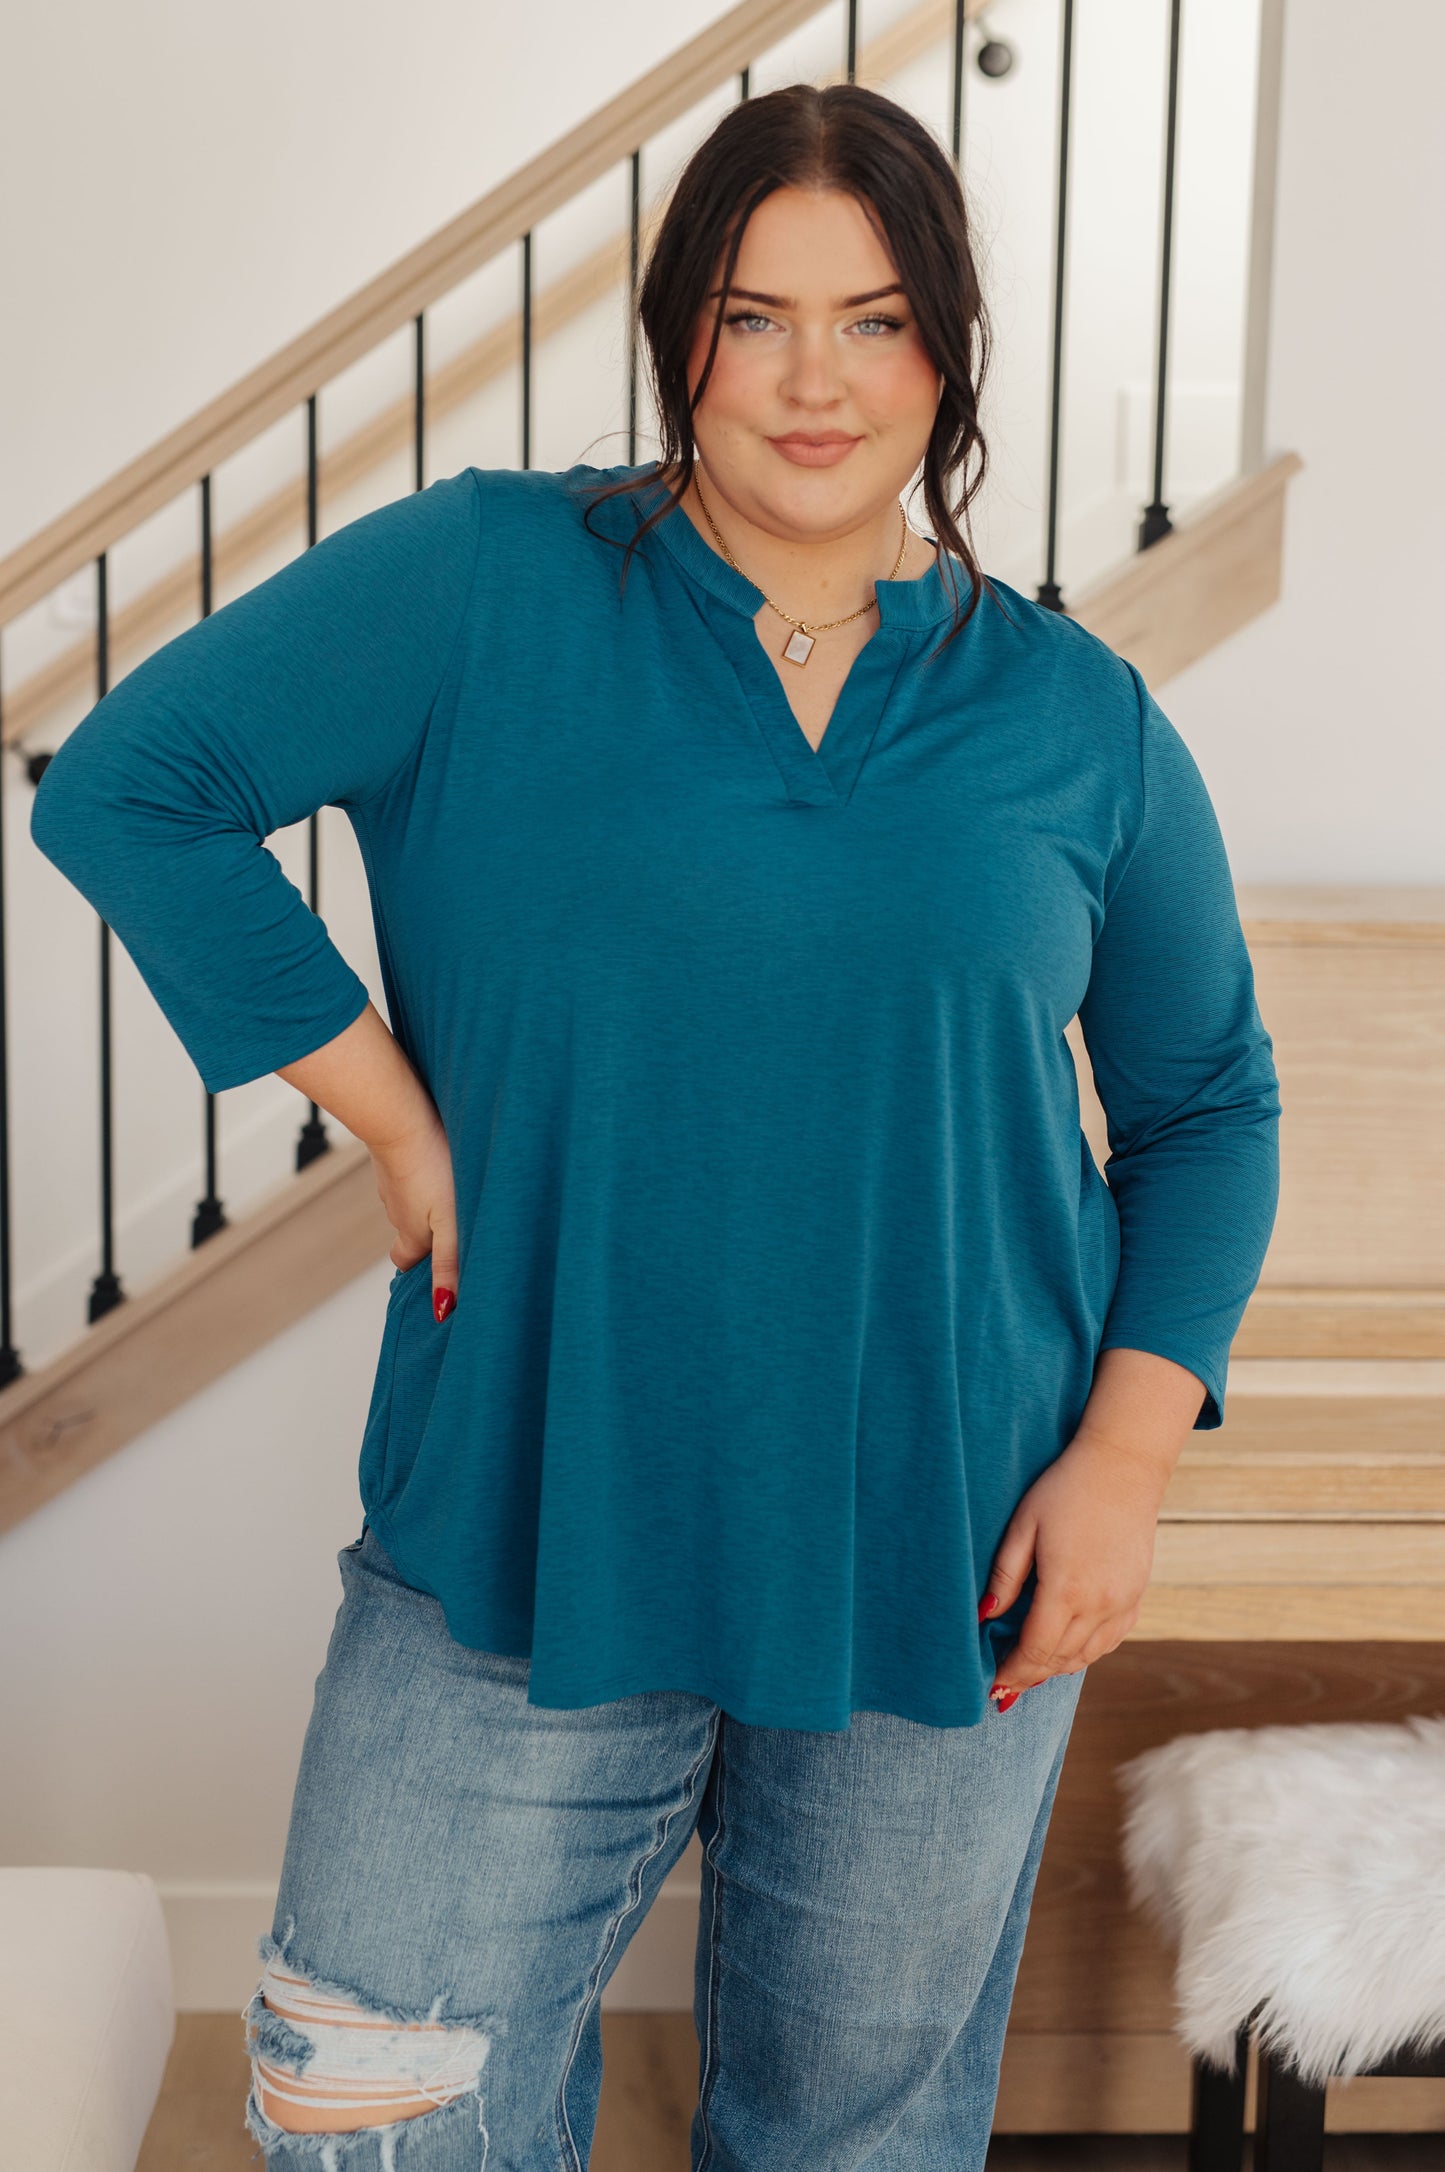 So Outstanding Top in Teal - Southern Divas Boutique